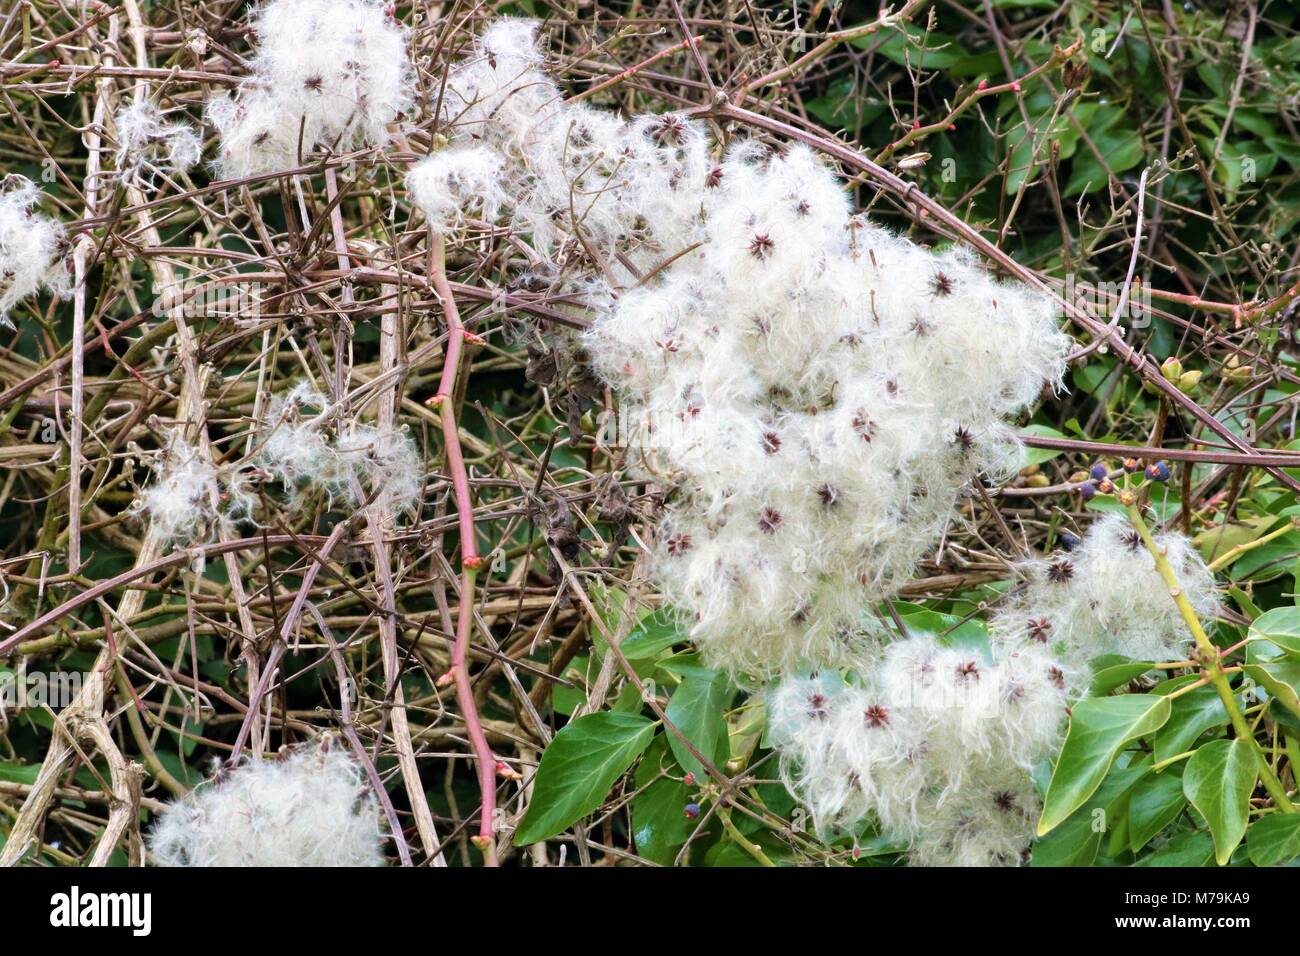 White Fluffy Flowers That Look Like Cotton 